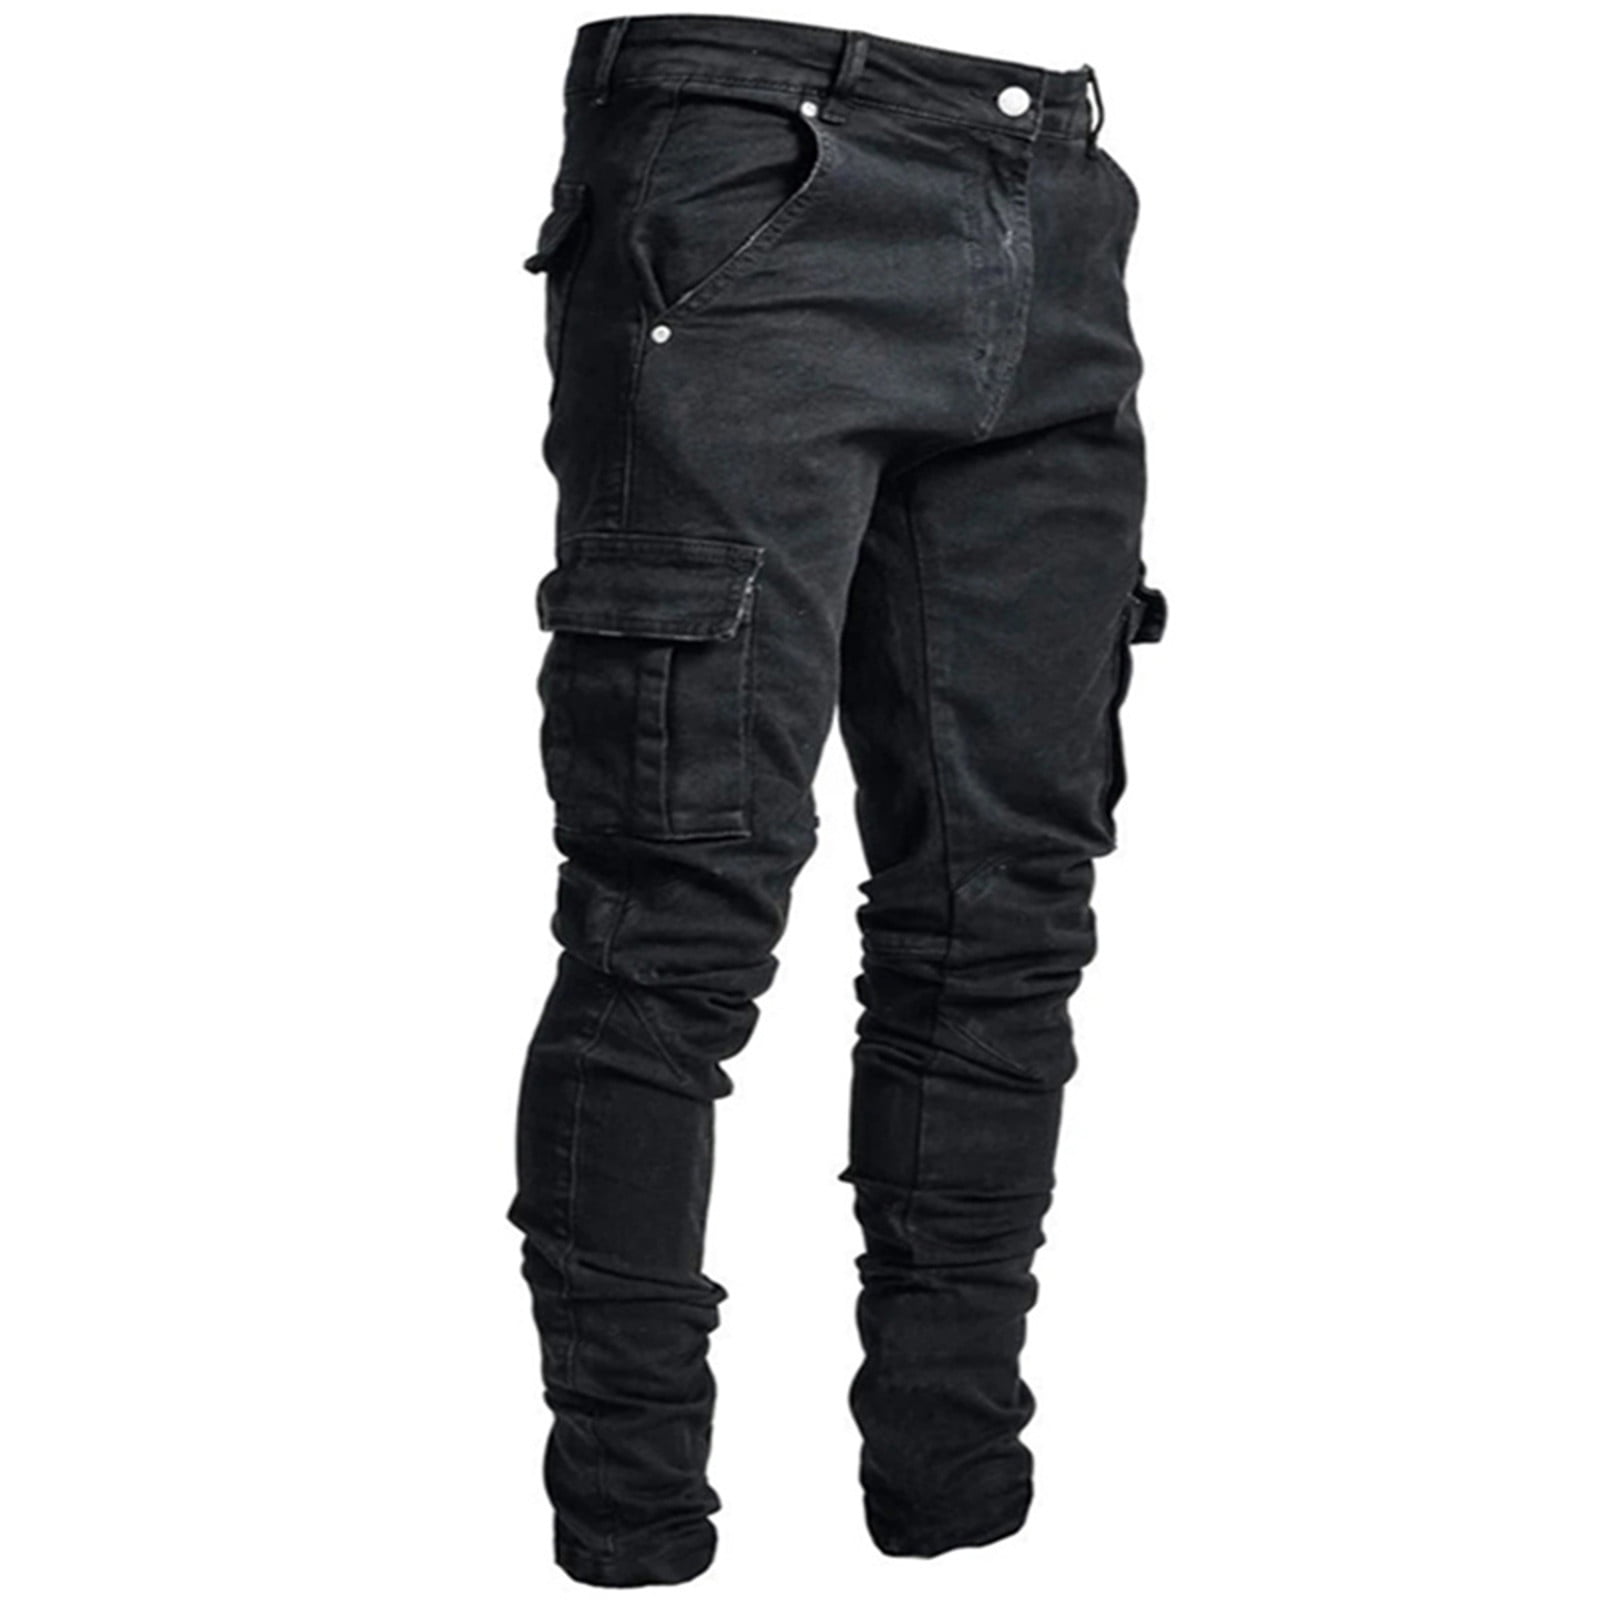 Aoochasliy Mens Jeans Clearance Reduced Price Men's Side Pocket ...